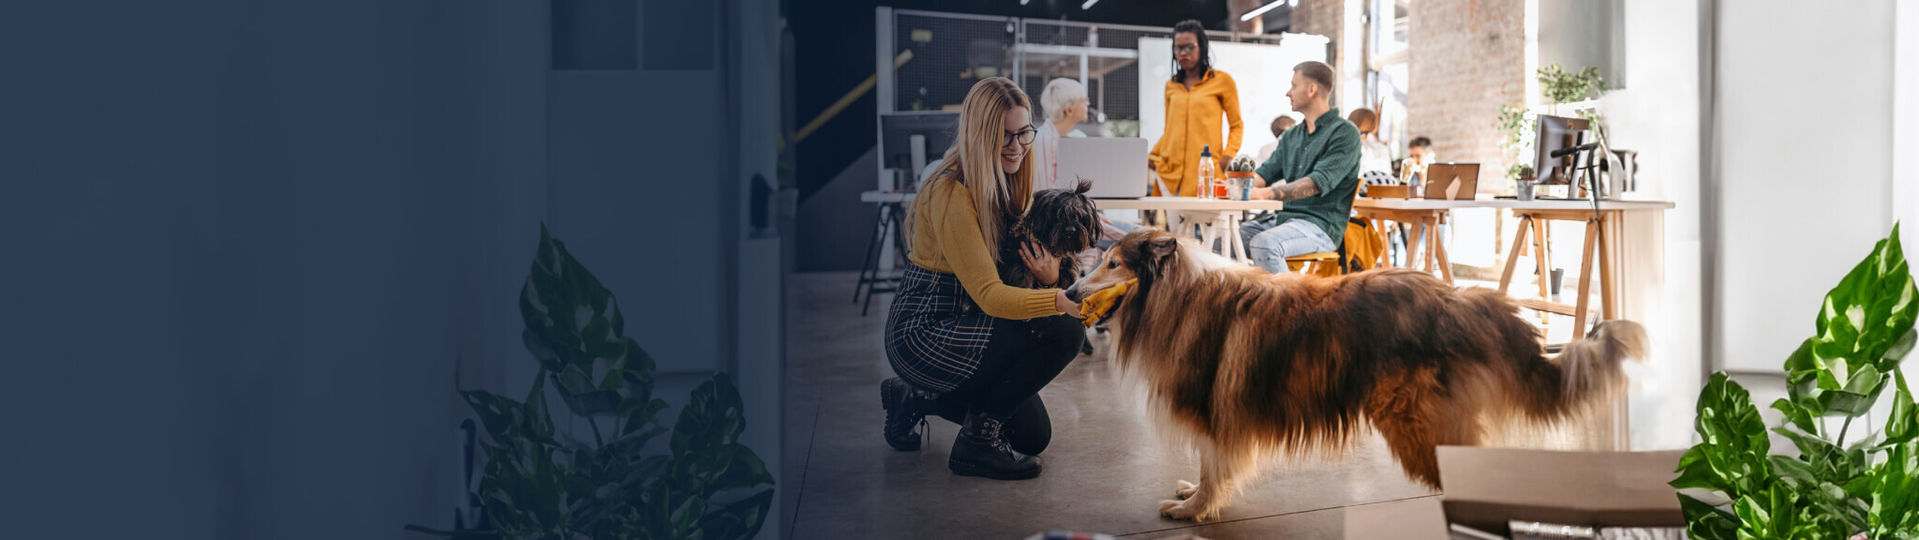 Woman playing with a dog in workplace